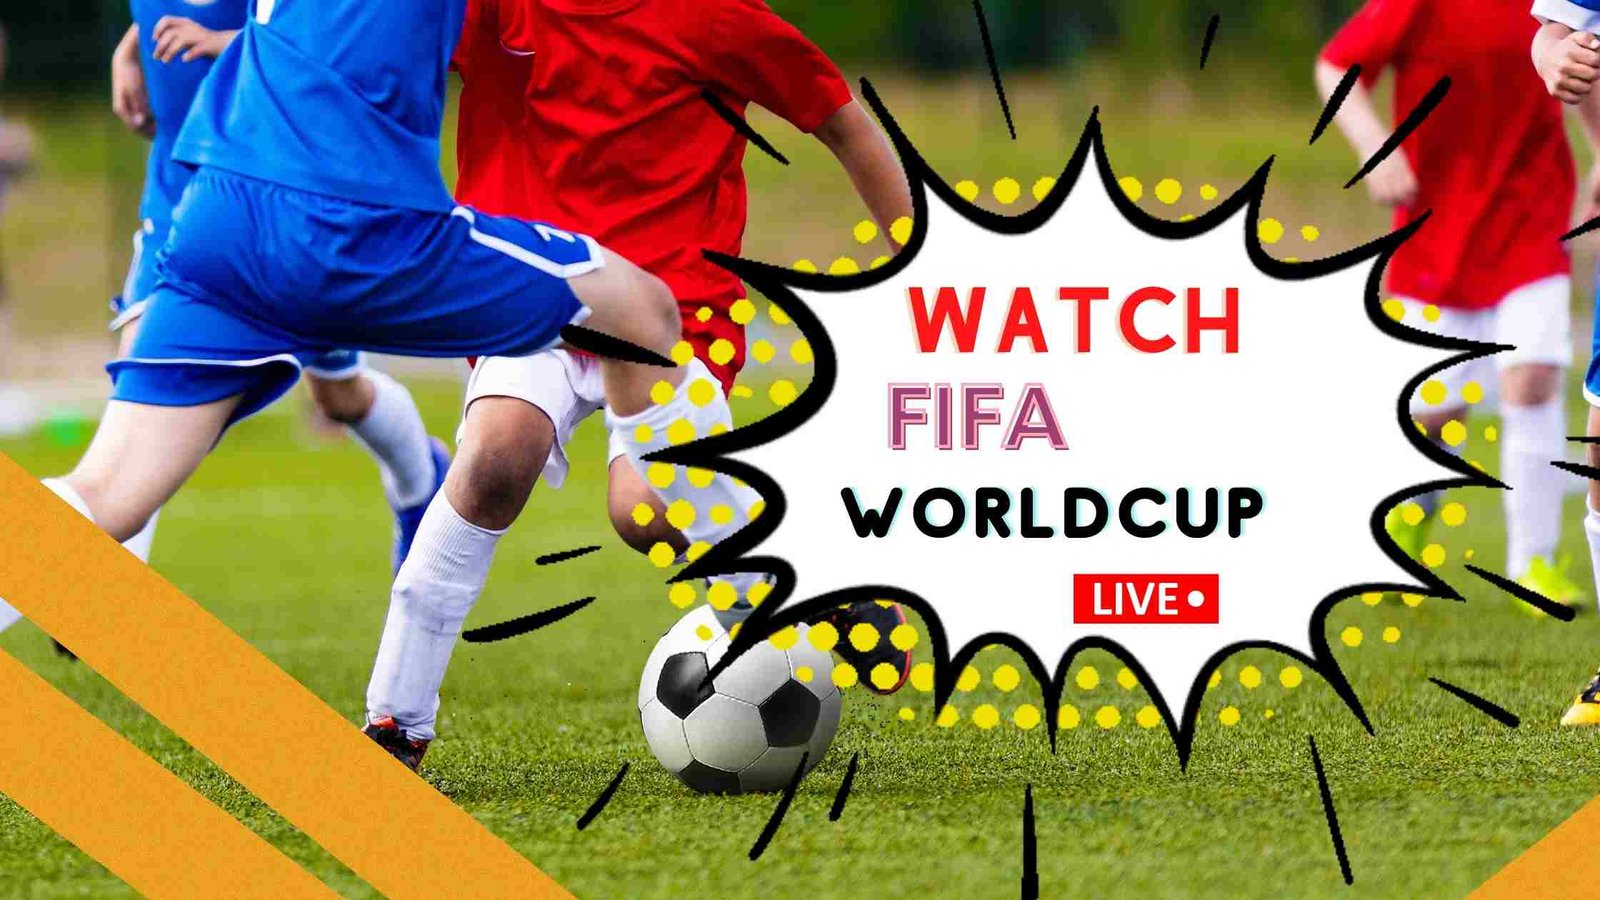 Fifa worldcup watch for free qatar